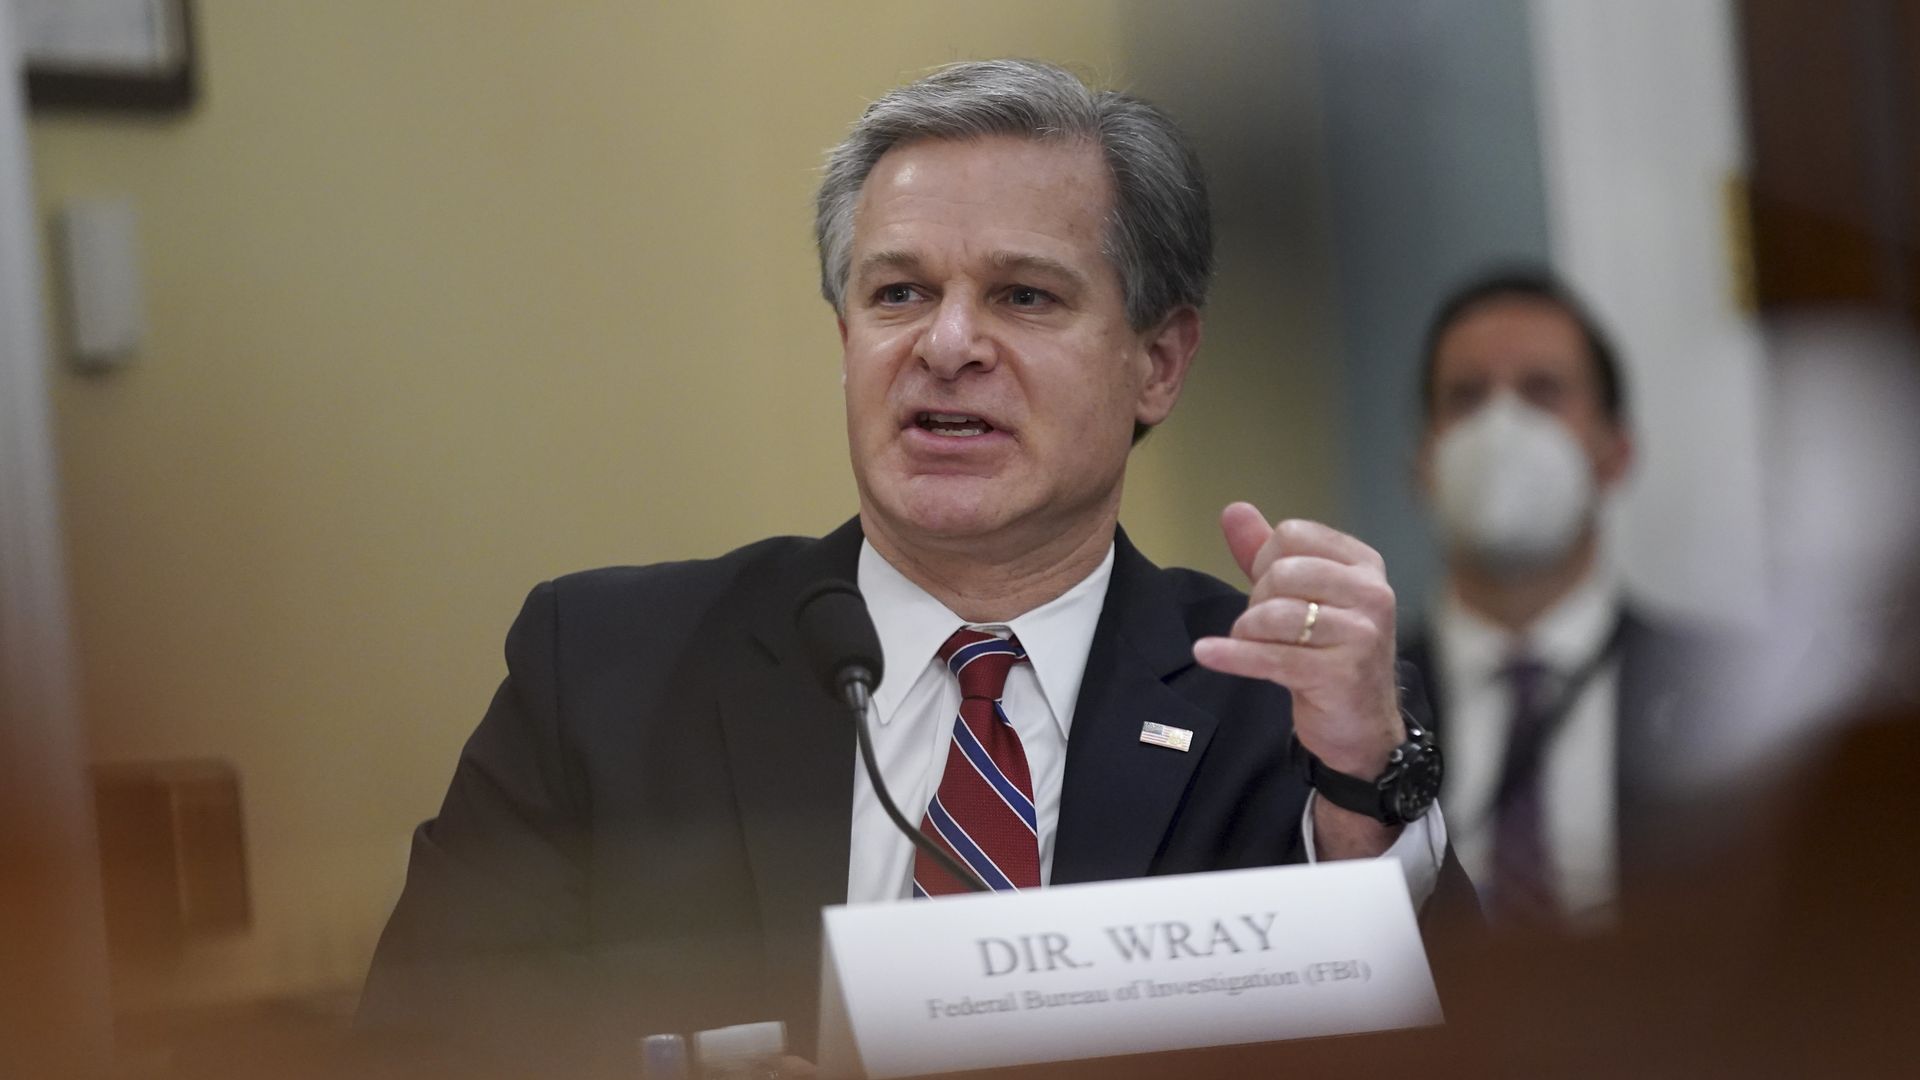 FBI Director Christopher Wray speaking during a House committee hearing in April 2021.